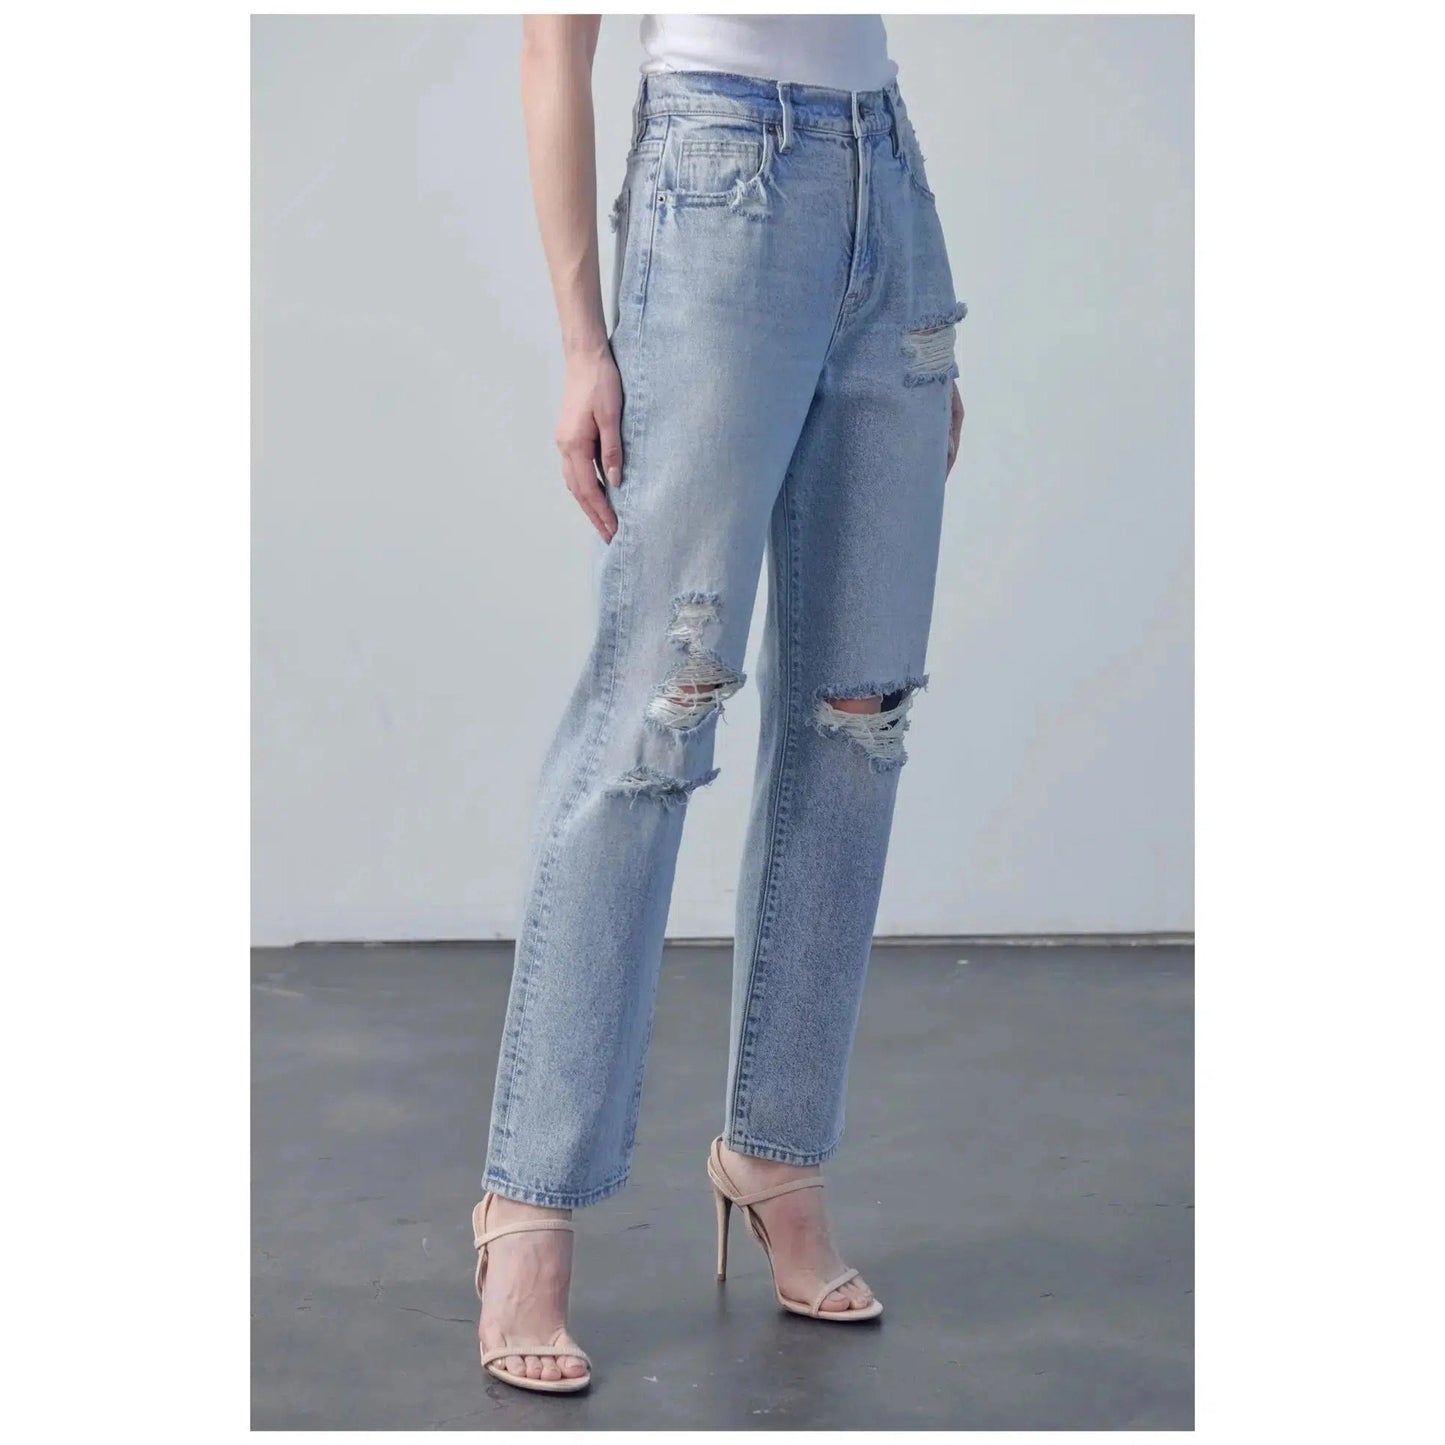 Denim Done Right Jeans